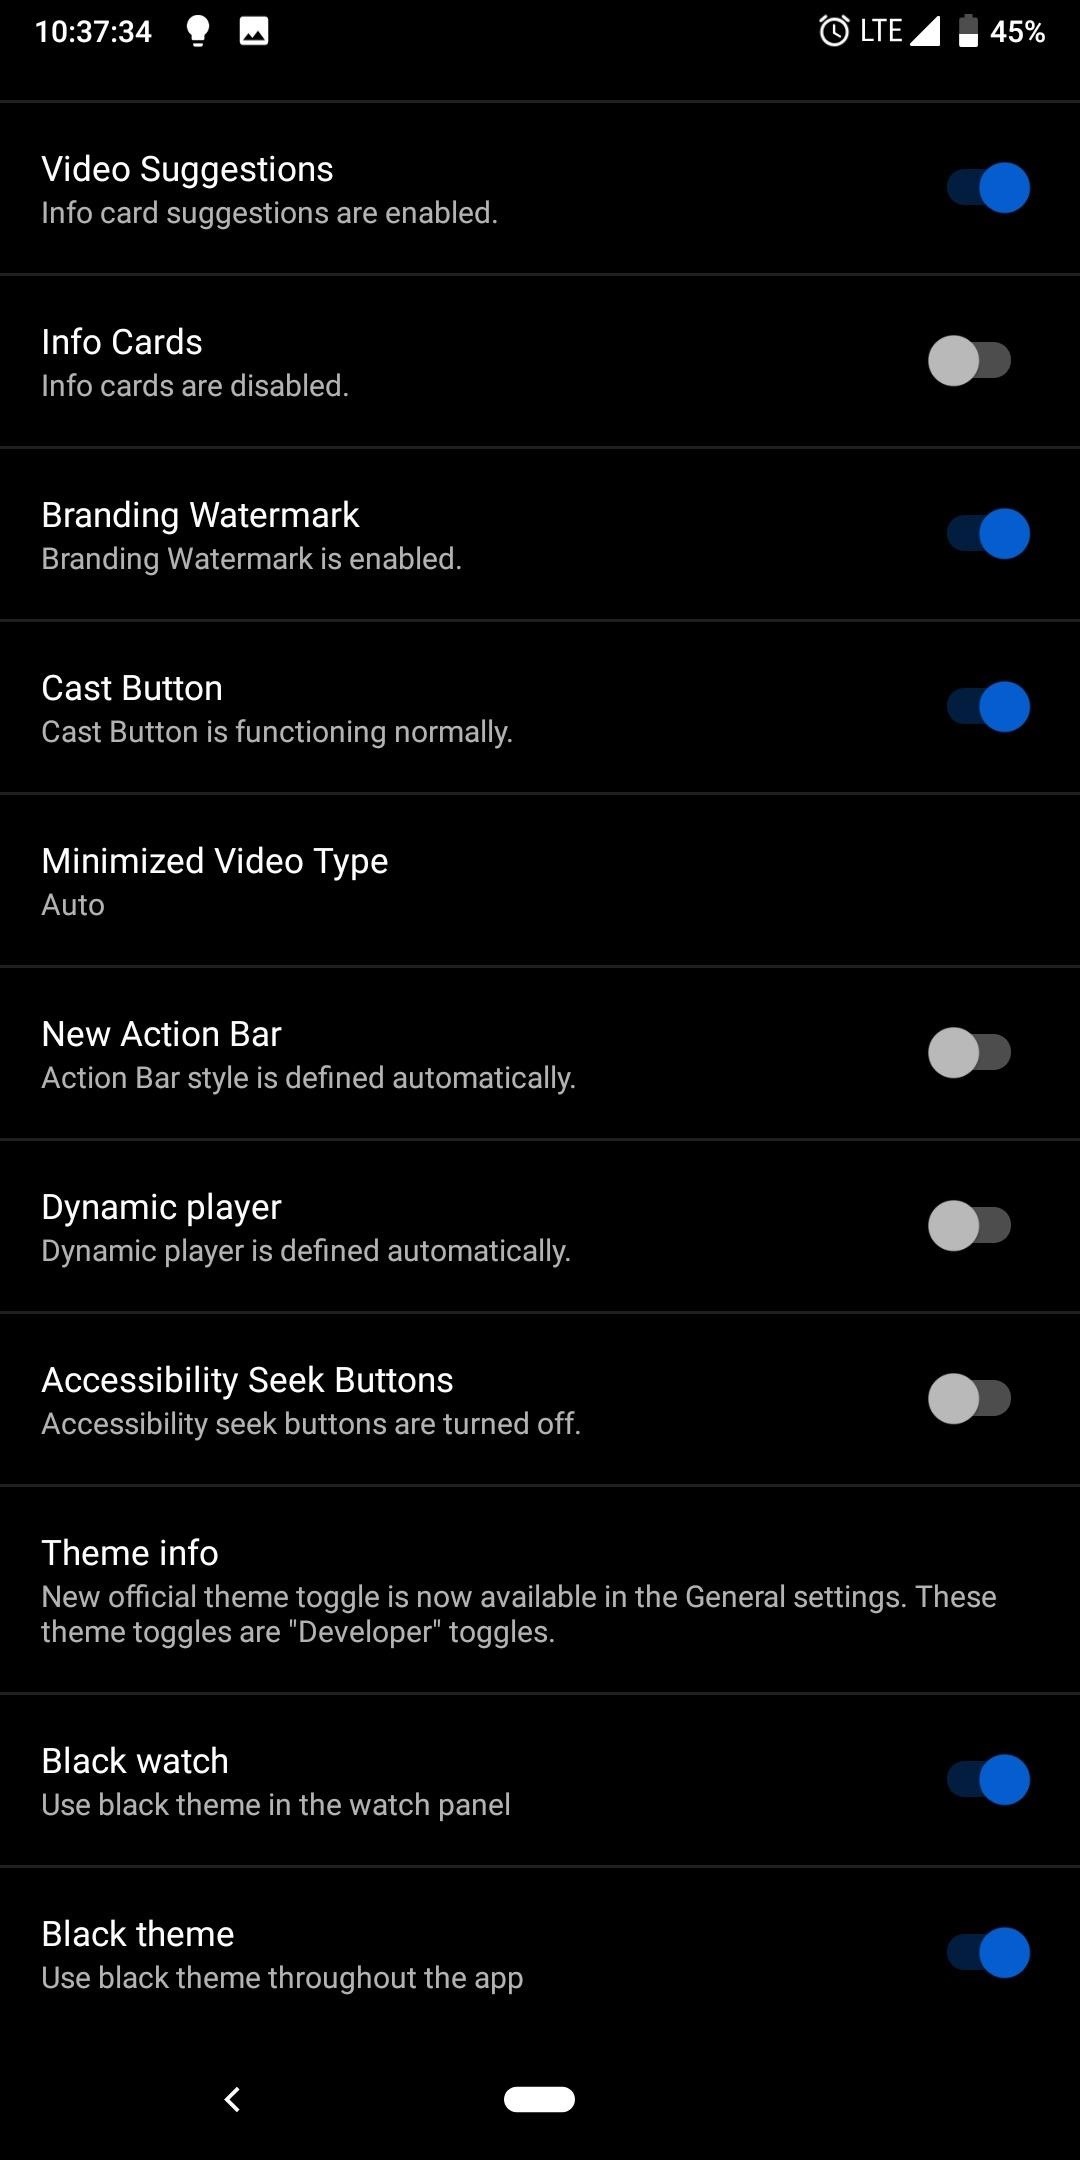 How to Get Custom Themes for YouTube on Android — Even a True Black OLED Theme